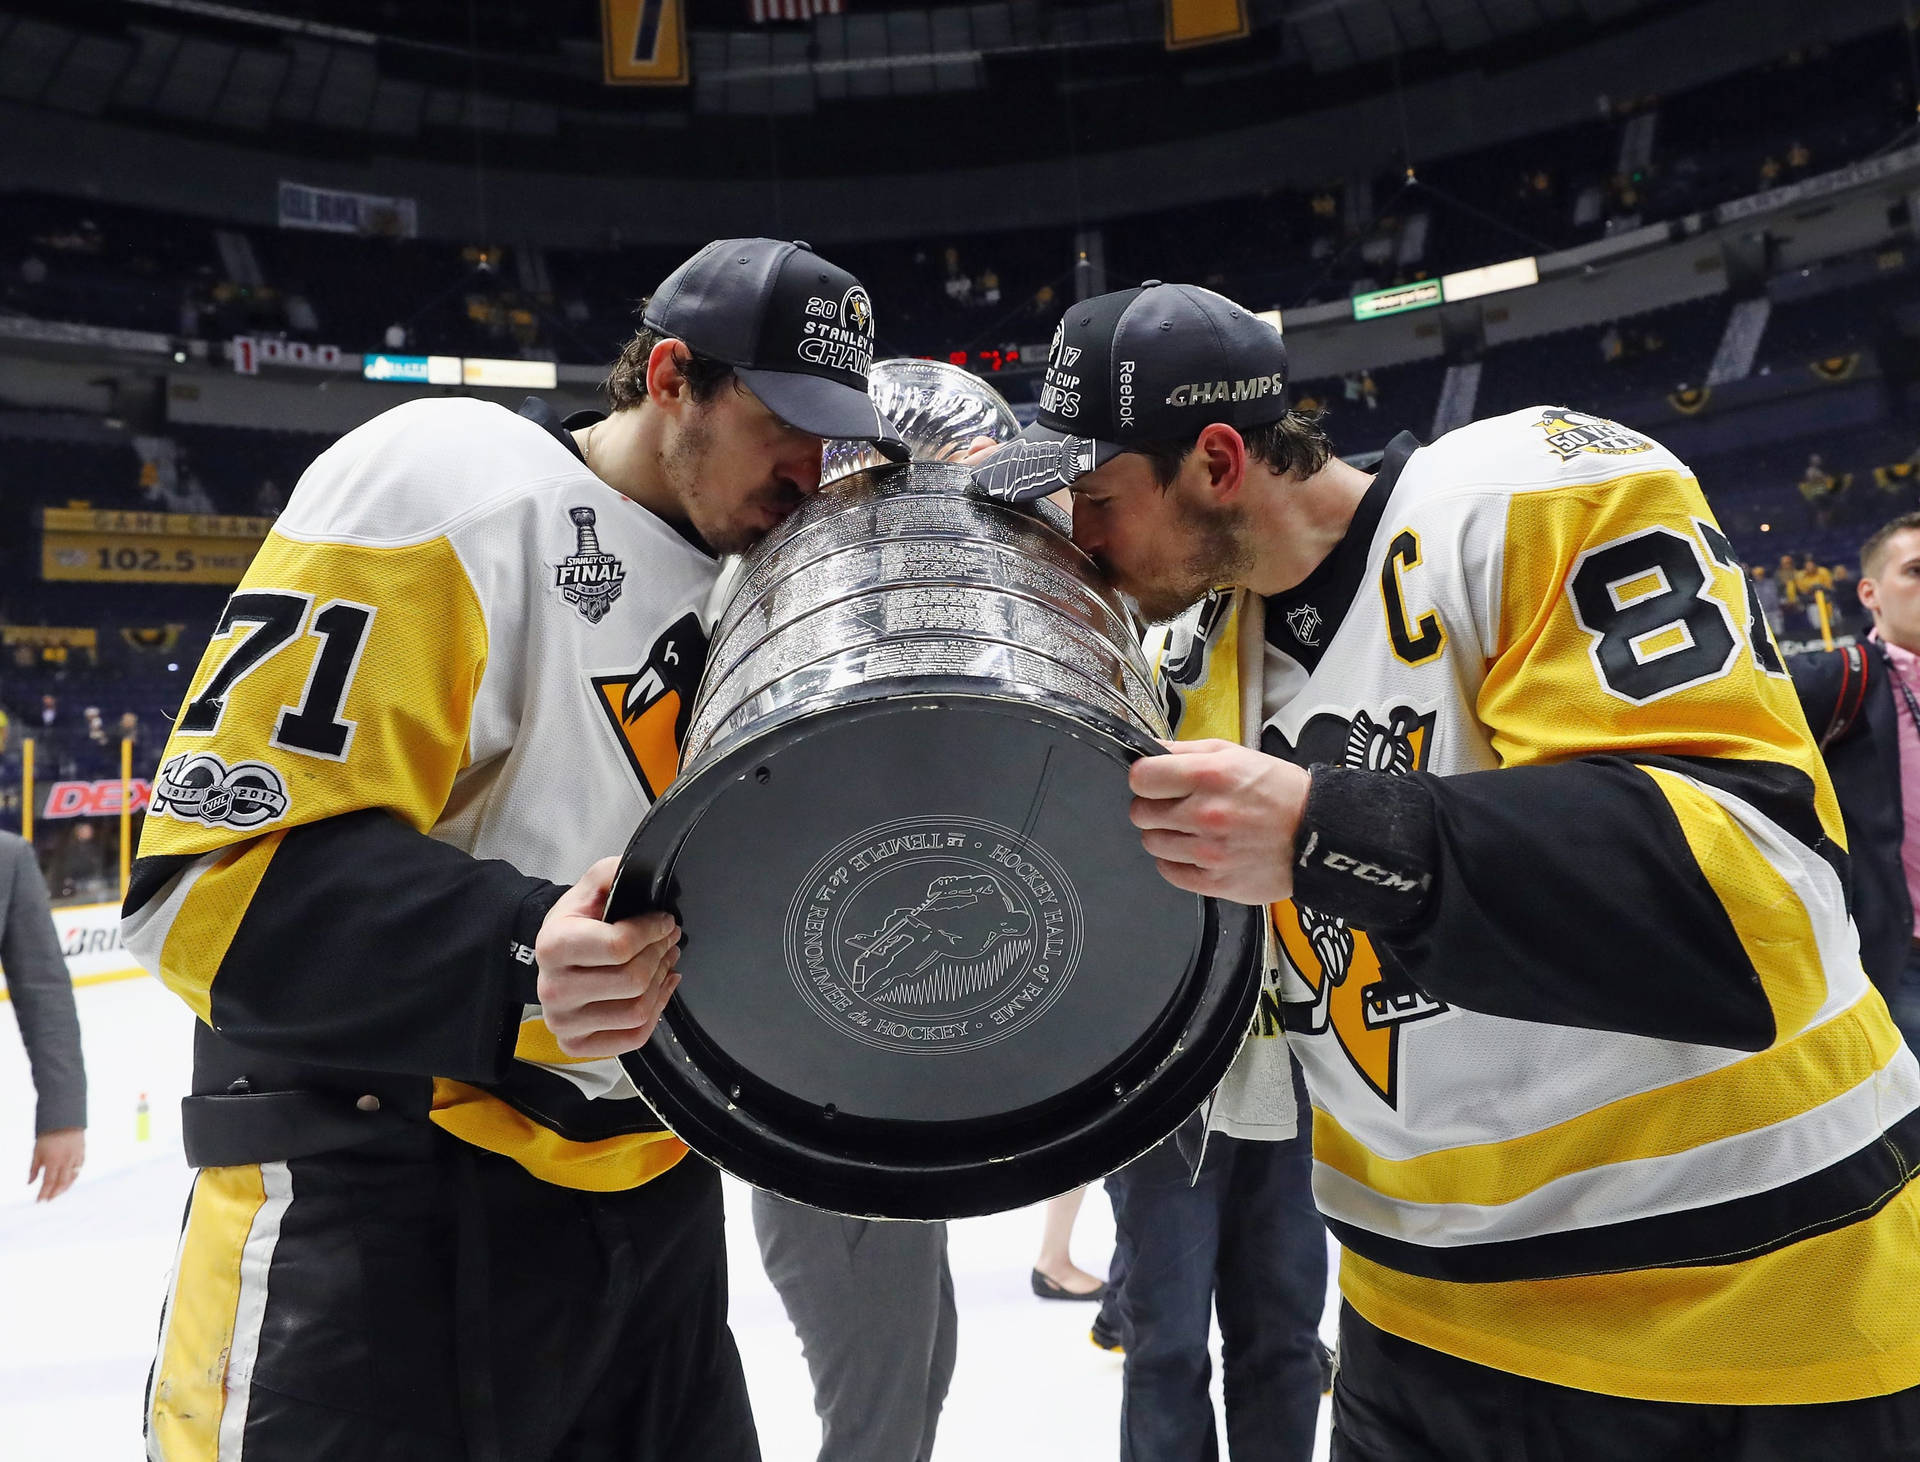 Penguins players celebrate Stanley Cup with adorable photos of